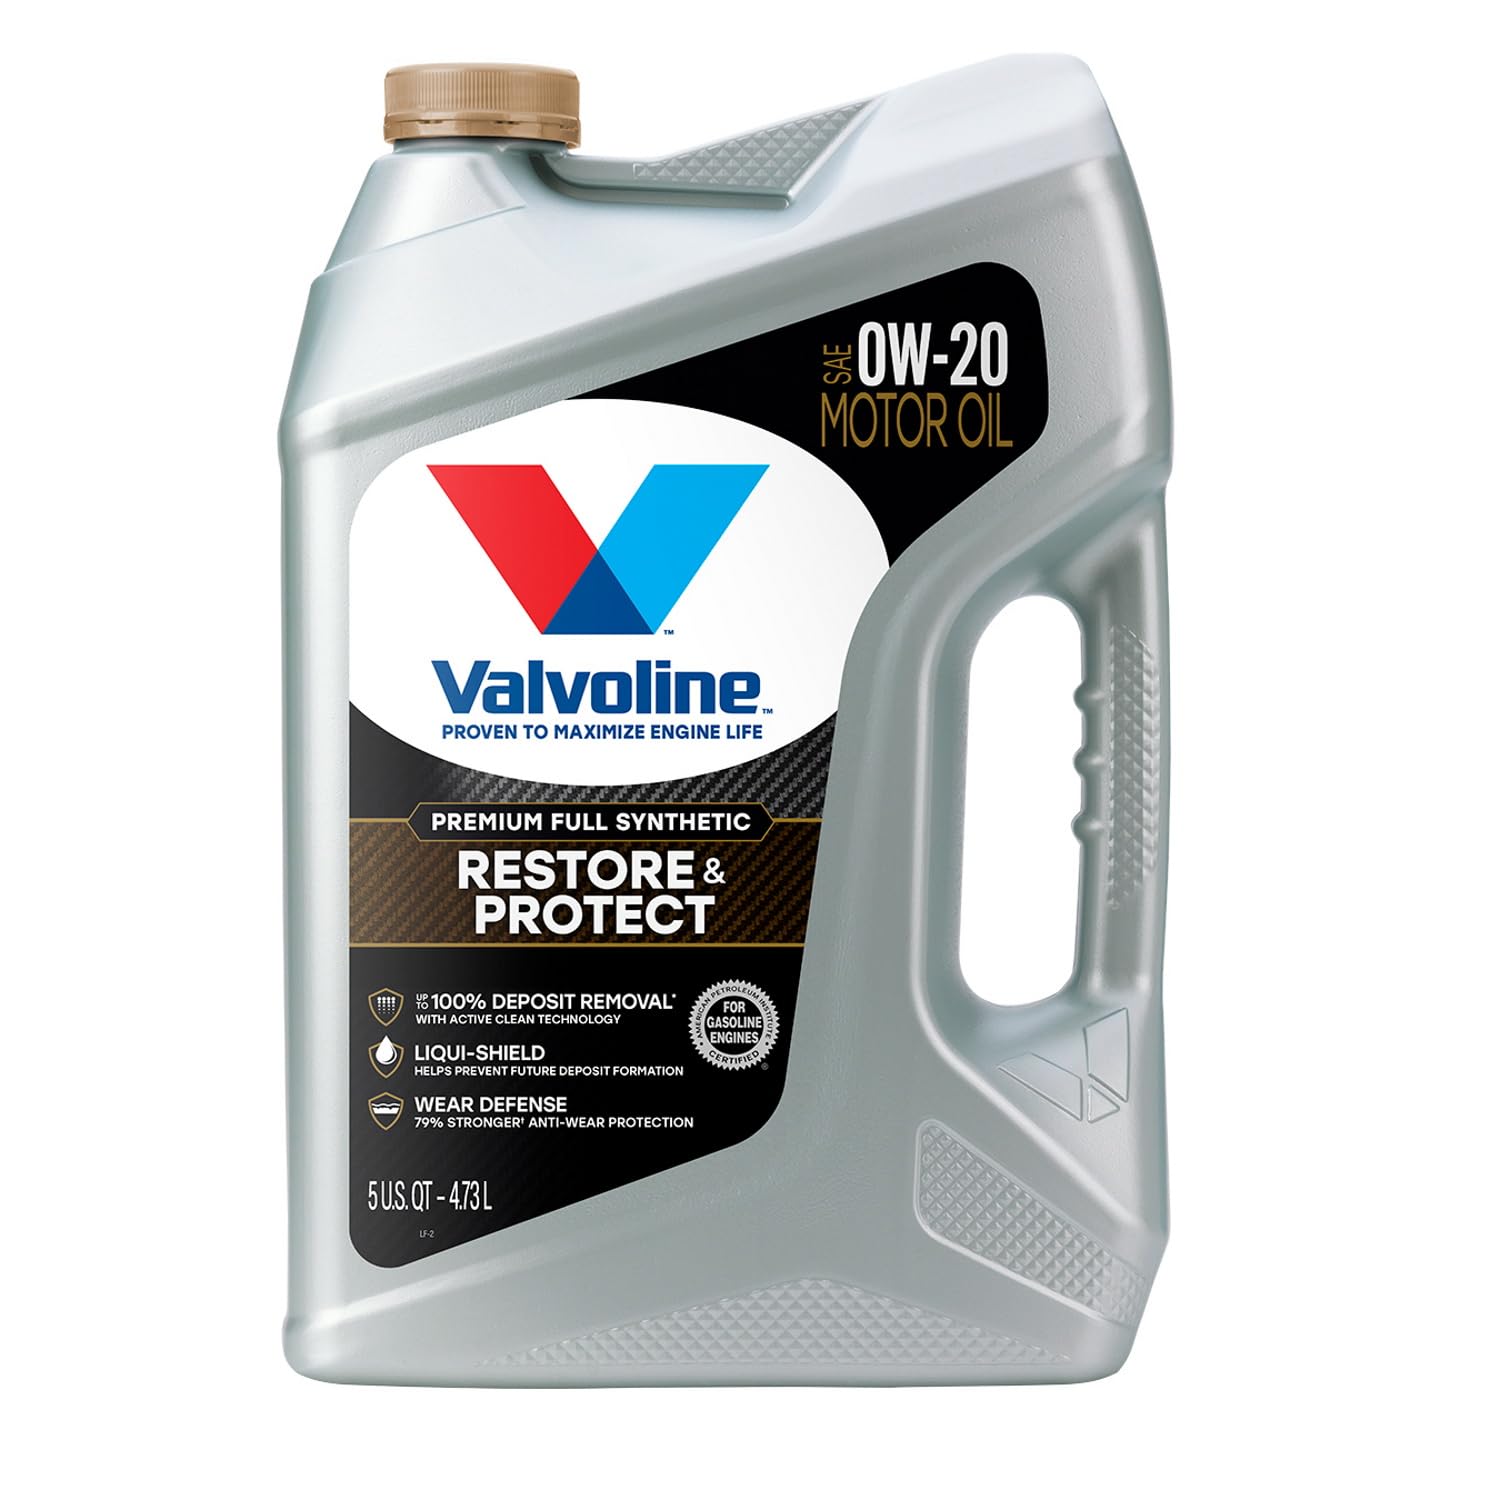 5-QT 0W-20 Valvoline Restore Protect Full Synthetic Motor Oil $26.60 Free Shipping w/ Prime or on $35 